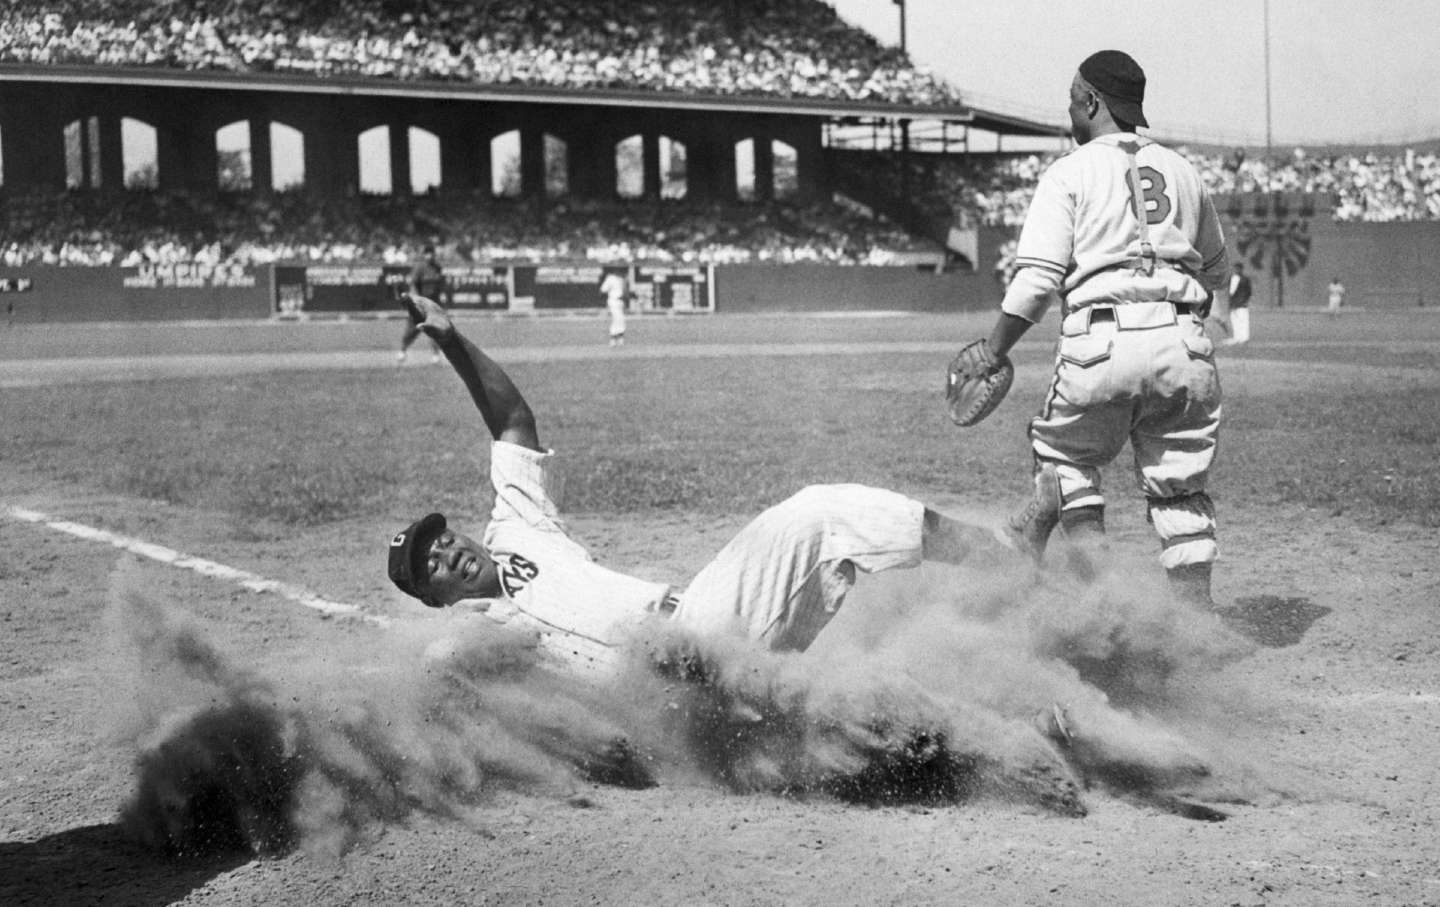 Counting the Negro League Records Is About More Than Numbers